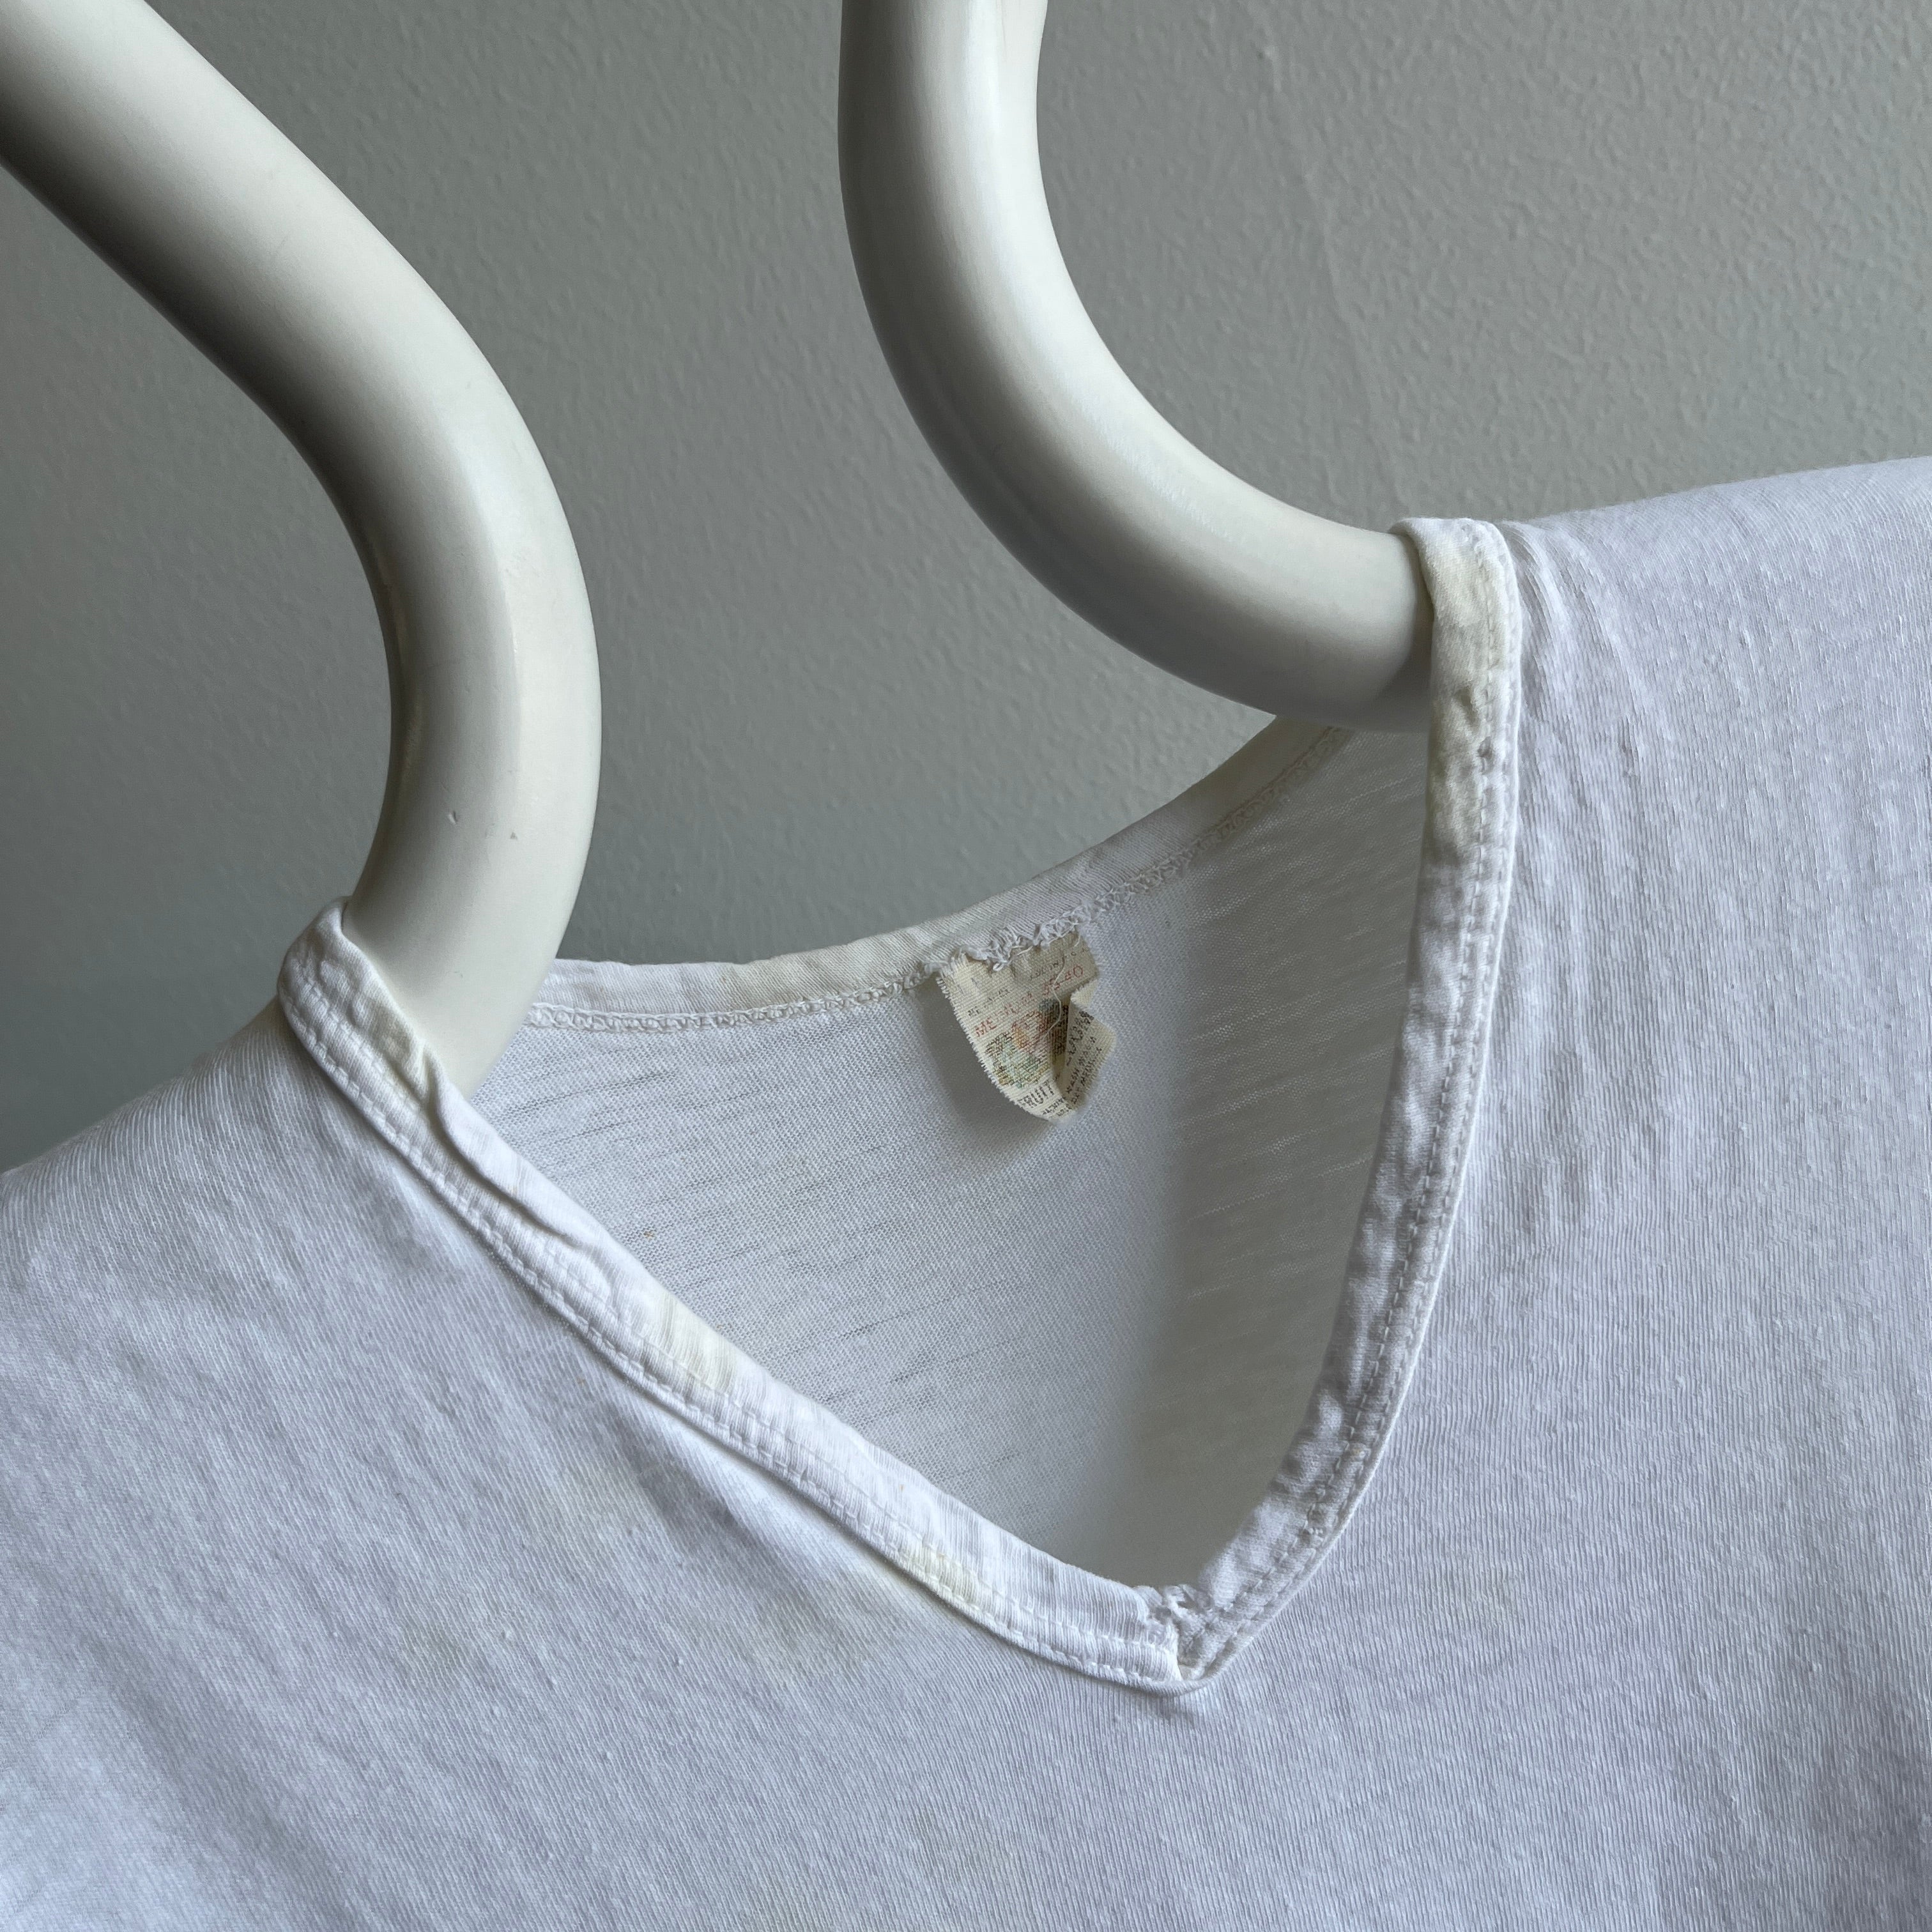 1970s Stained Blank White Cotton V-Neck T-Shirt by FOTL